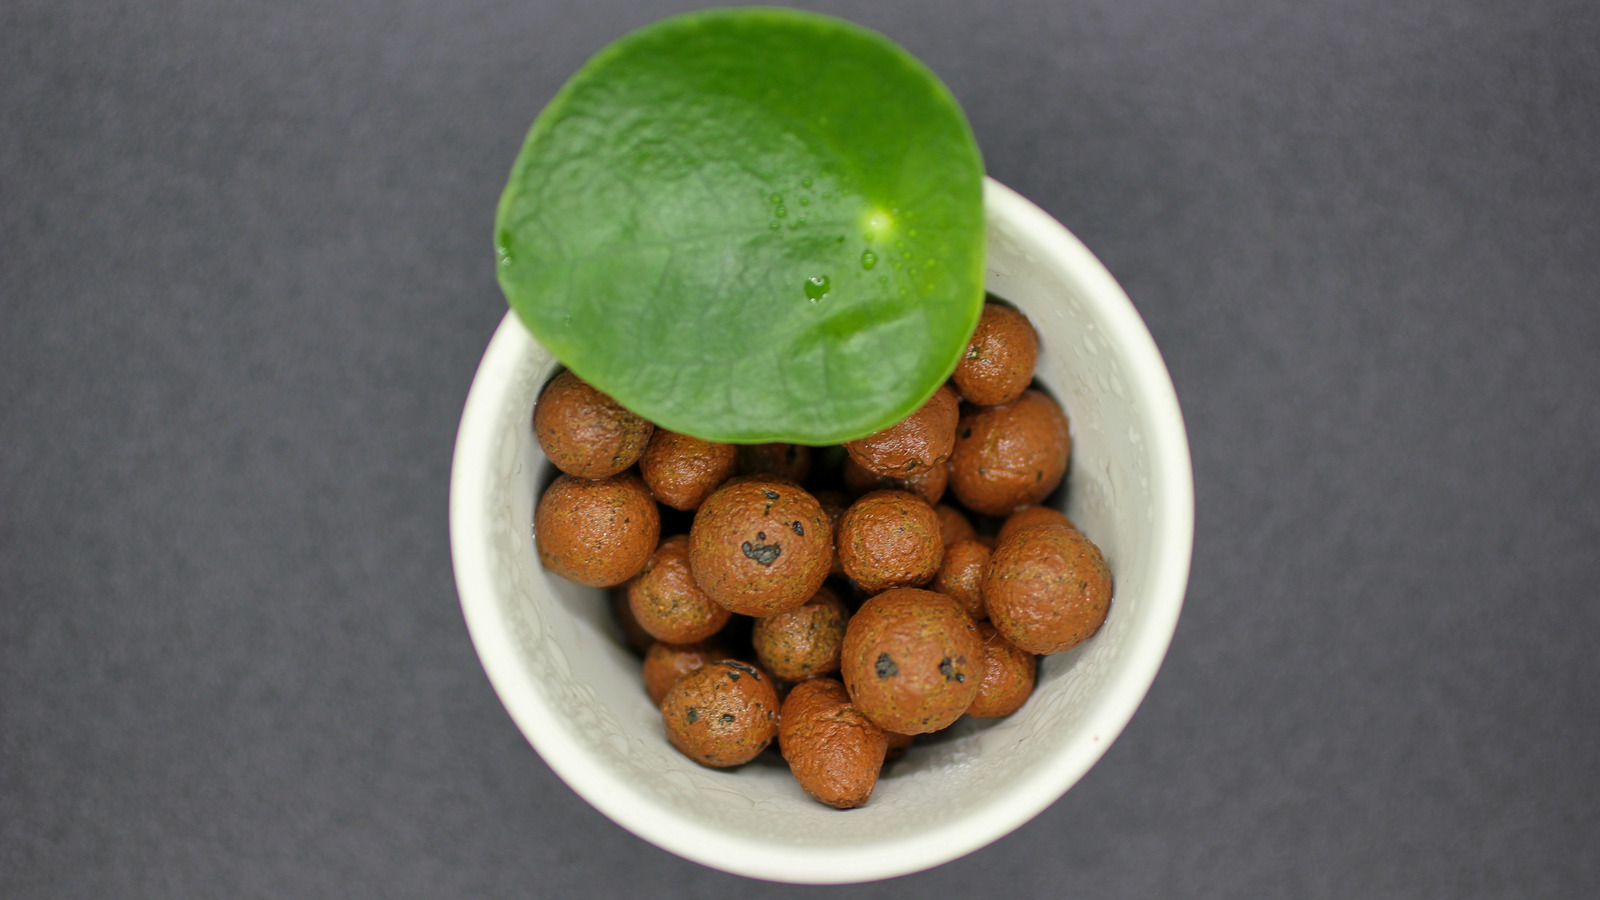 Quality Hydroponic Medium: Discover Clay Pebbles for Indoor Gardening